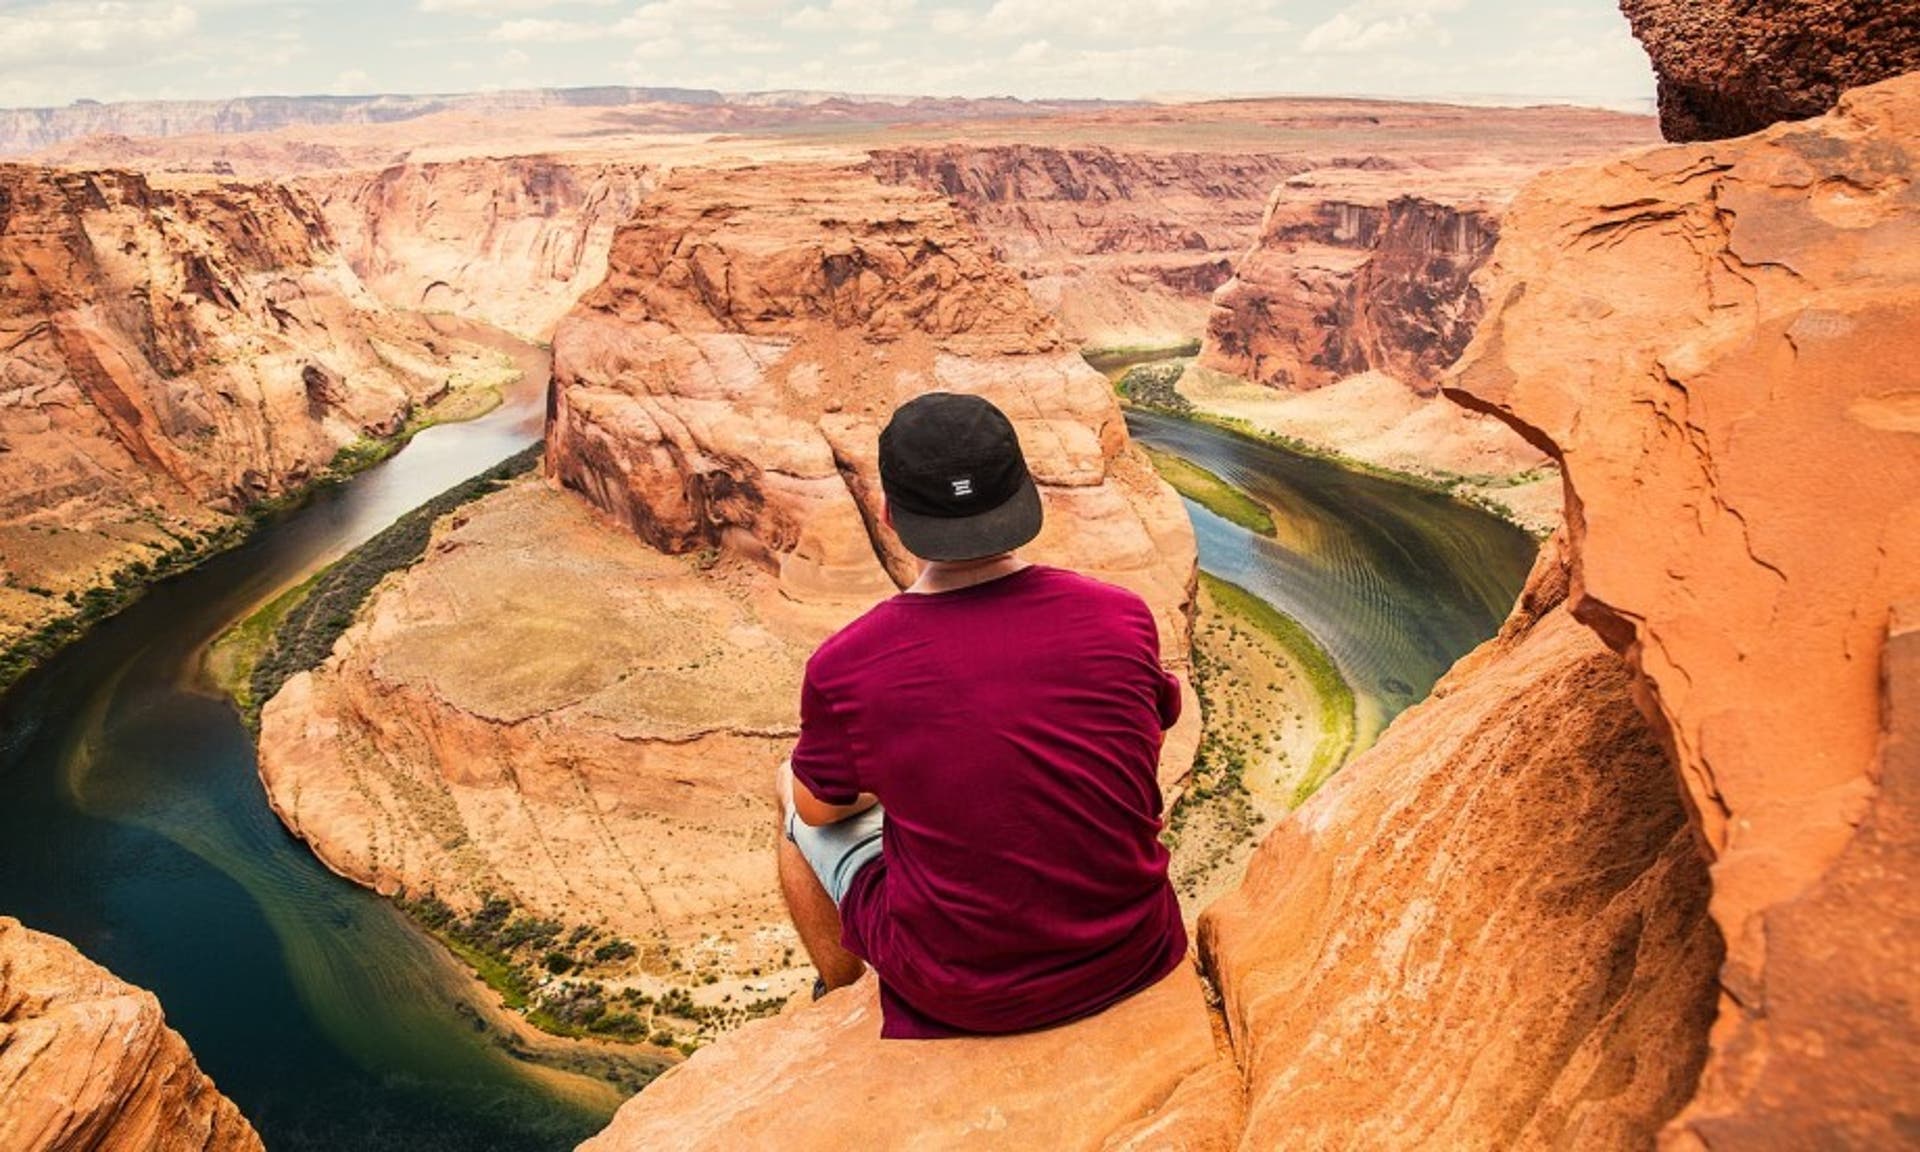  man sat on the edge of a canyon looking out at the views 